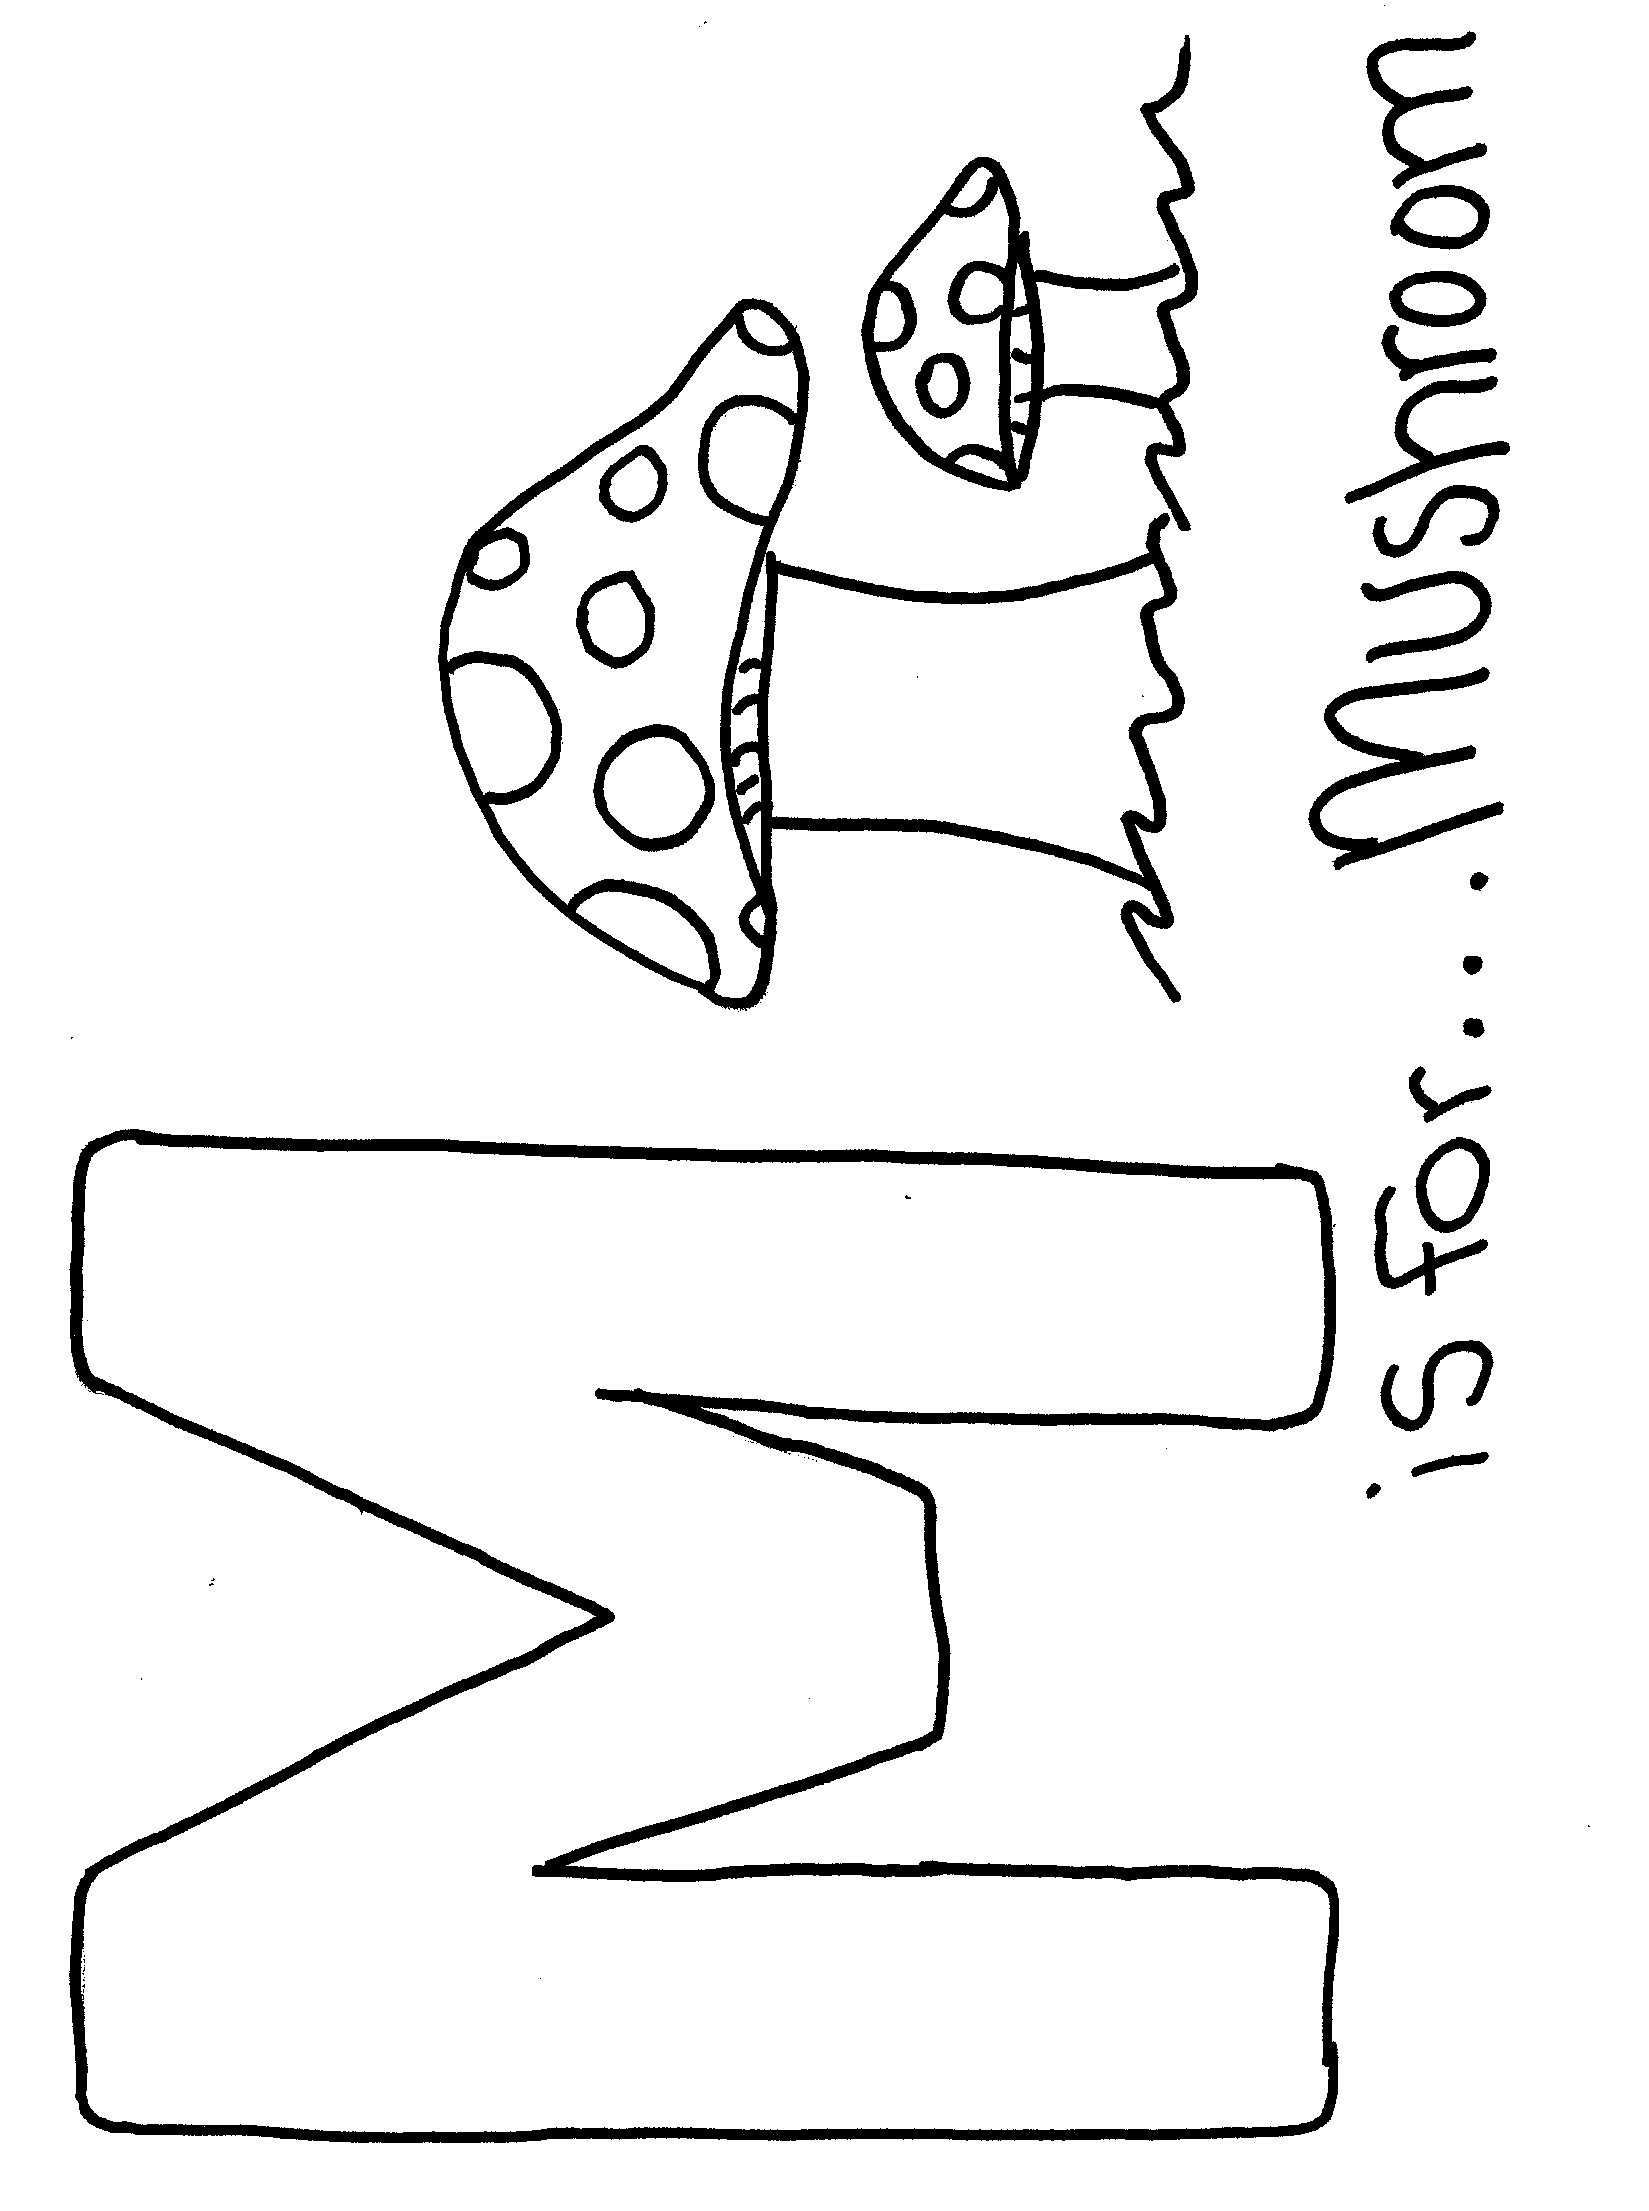 Free Alphabet coloring page M is for Mushroom